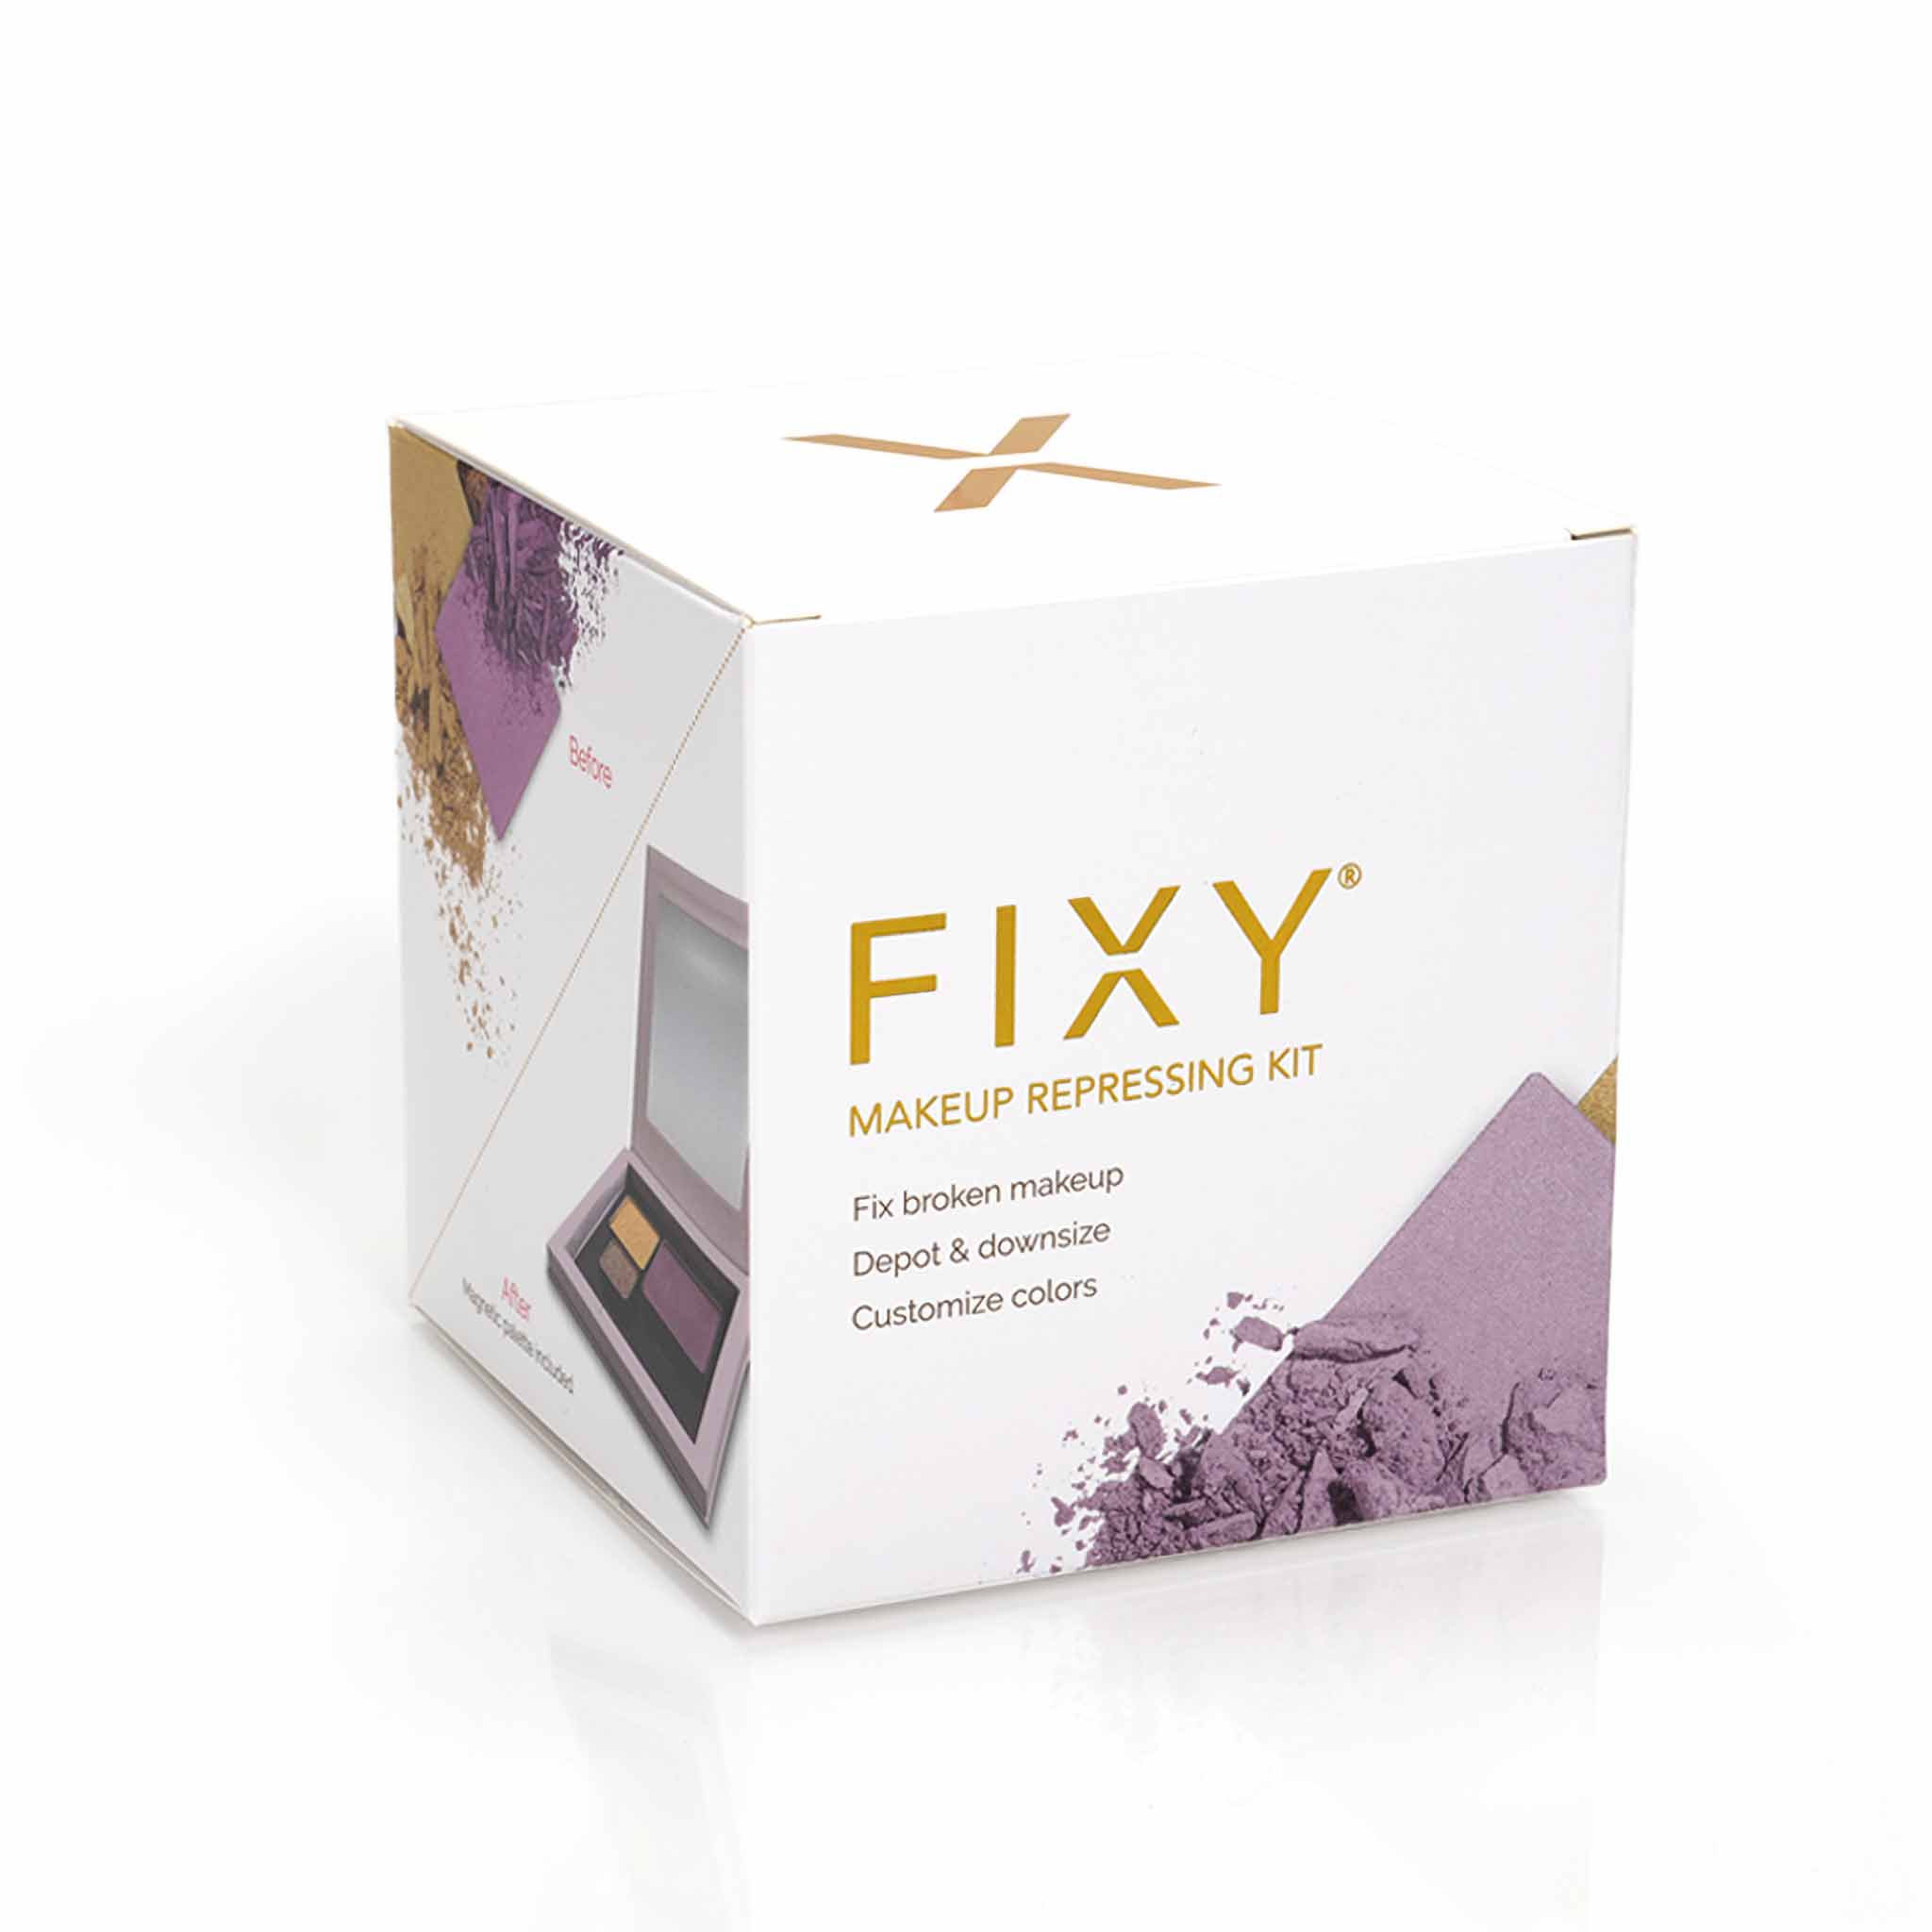 Packaging box of FIXY Makeup Repressing Kit for square makeup pans with features listed: &#39;Fix broken makeup, Depot &amp; downsize, Customize colors. Visible on the box is a preview window showing the kit inside with crushed makeup powders, indicating the repair process.